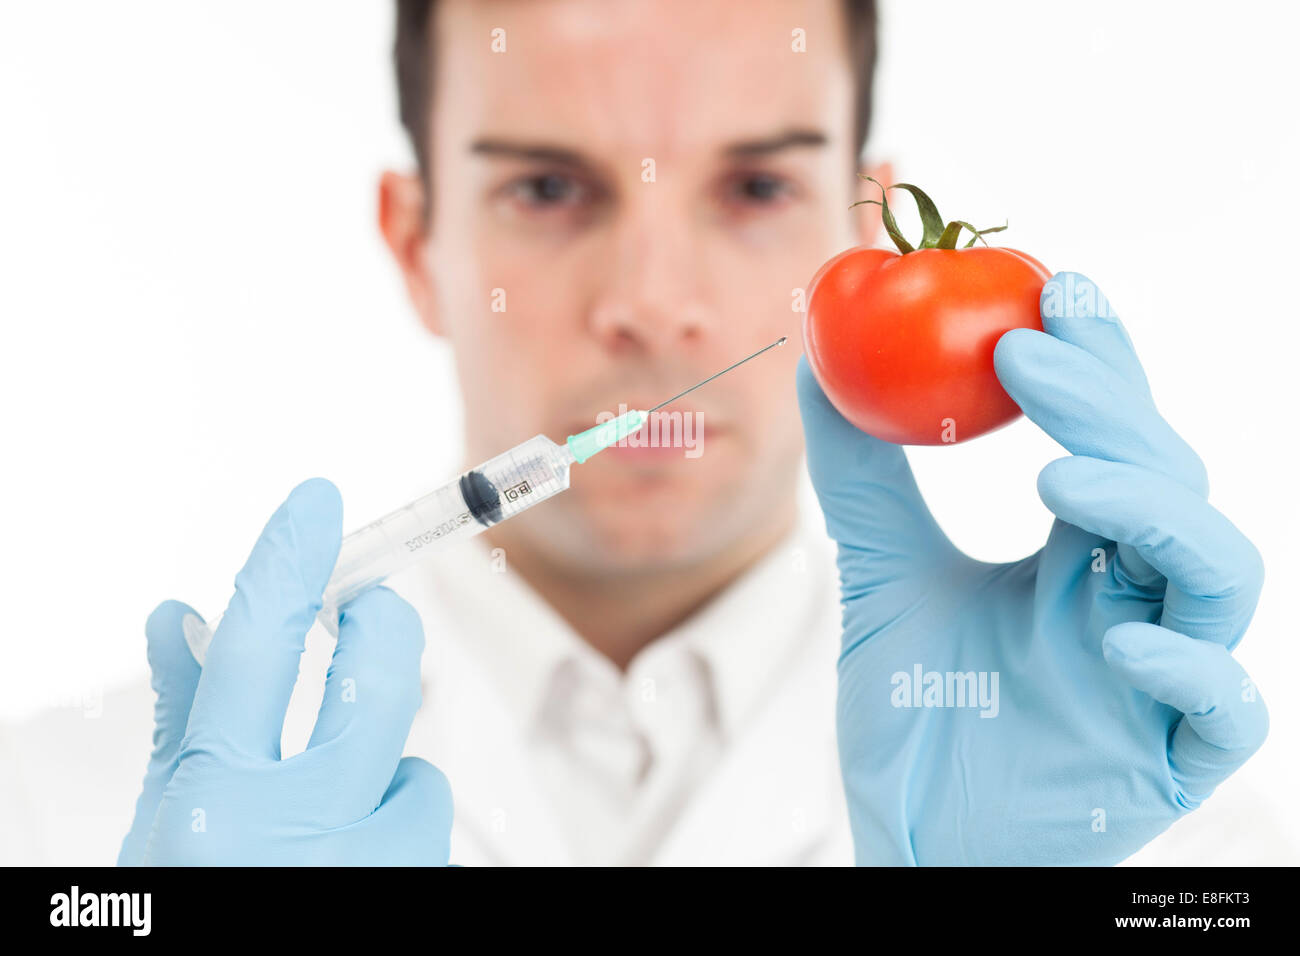 Scientist Injecting A Tomato Stock Photo